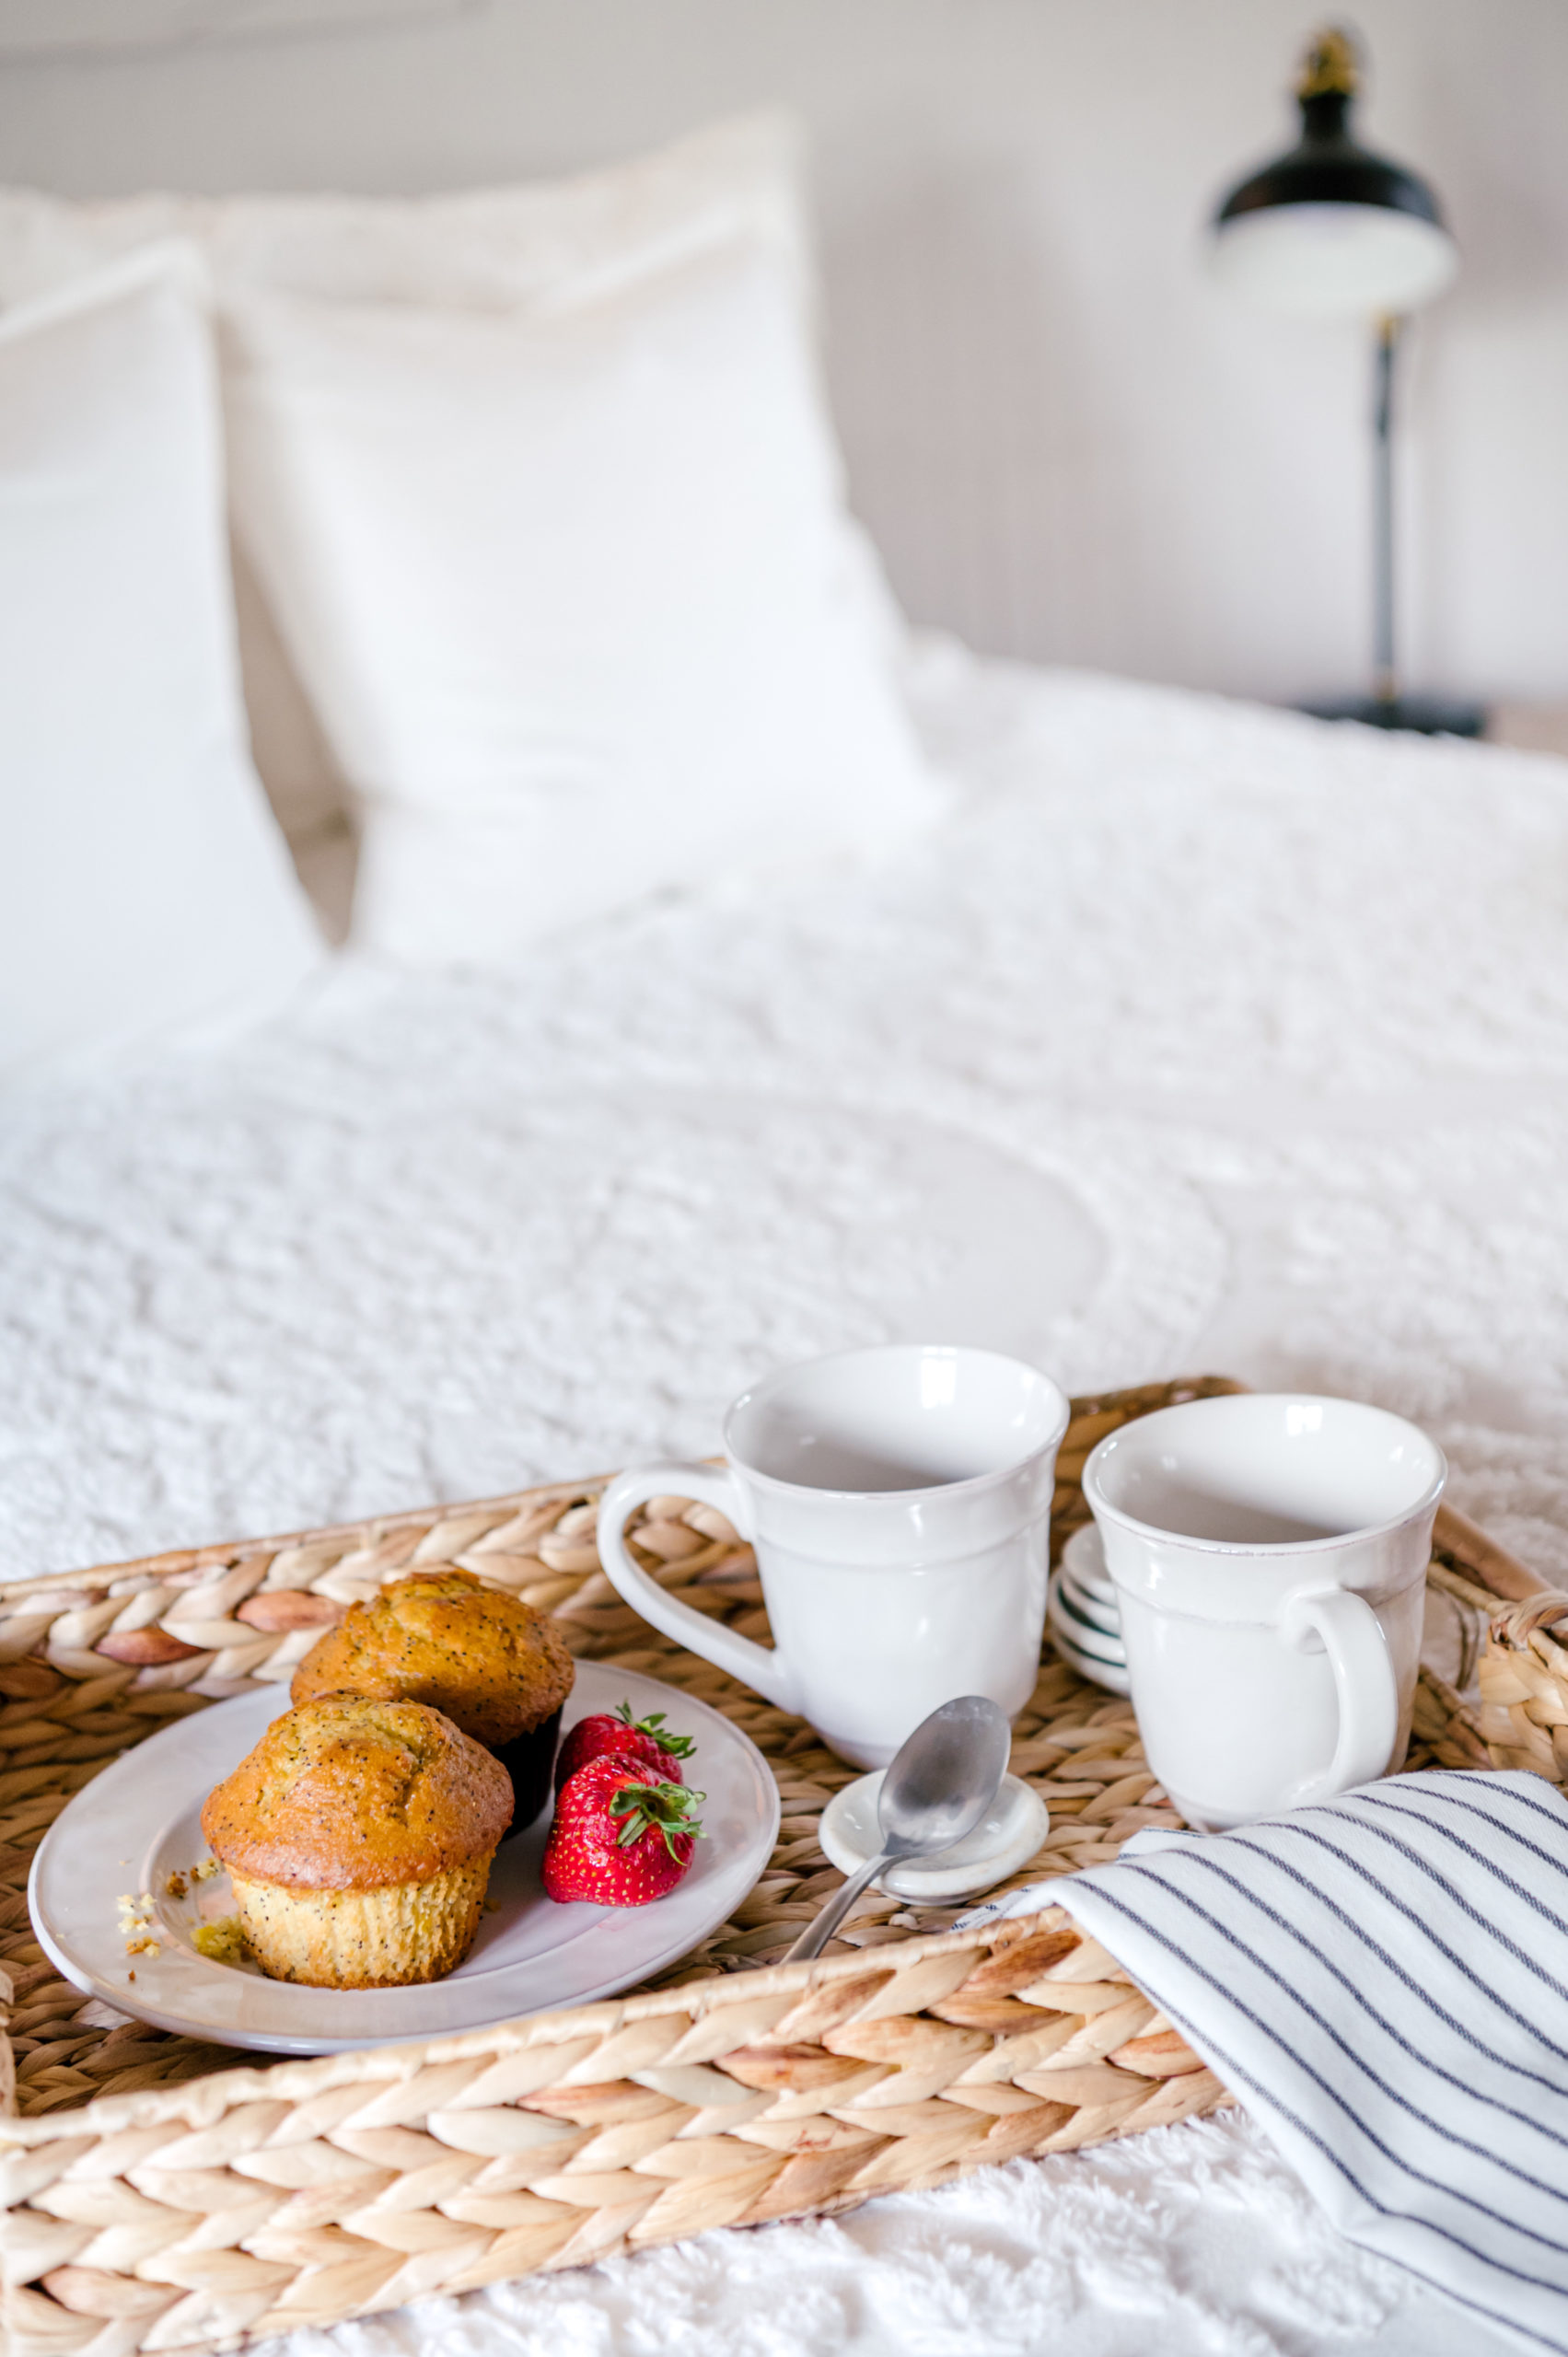 Breakfast tray with muffins, coffee mugs and striped napkin on white bed